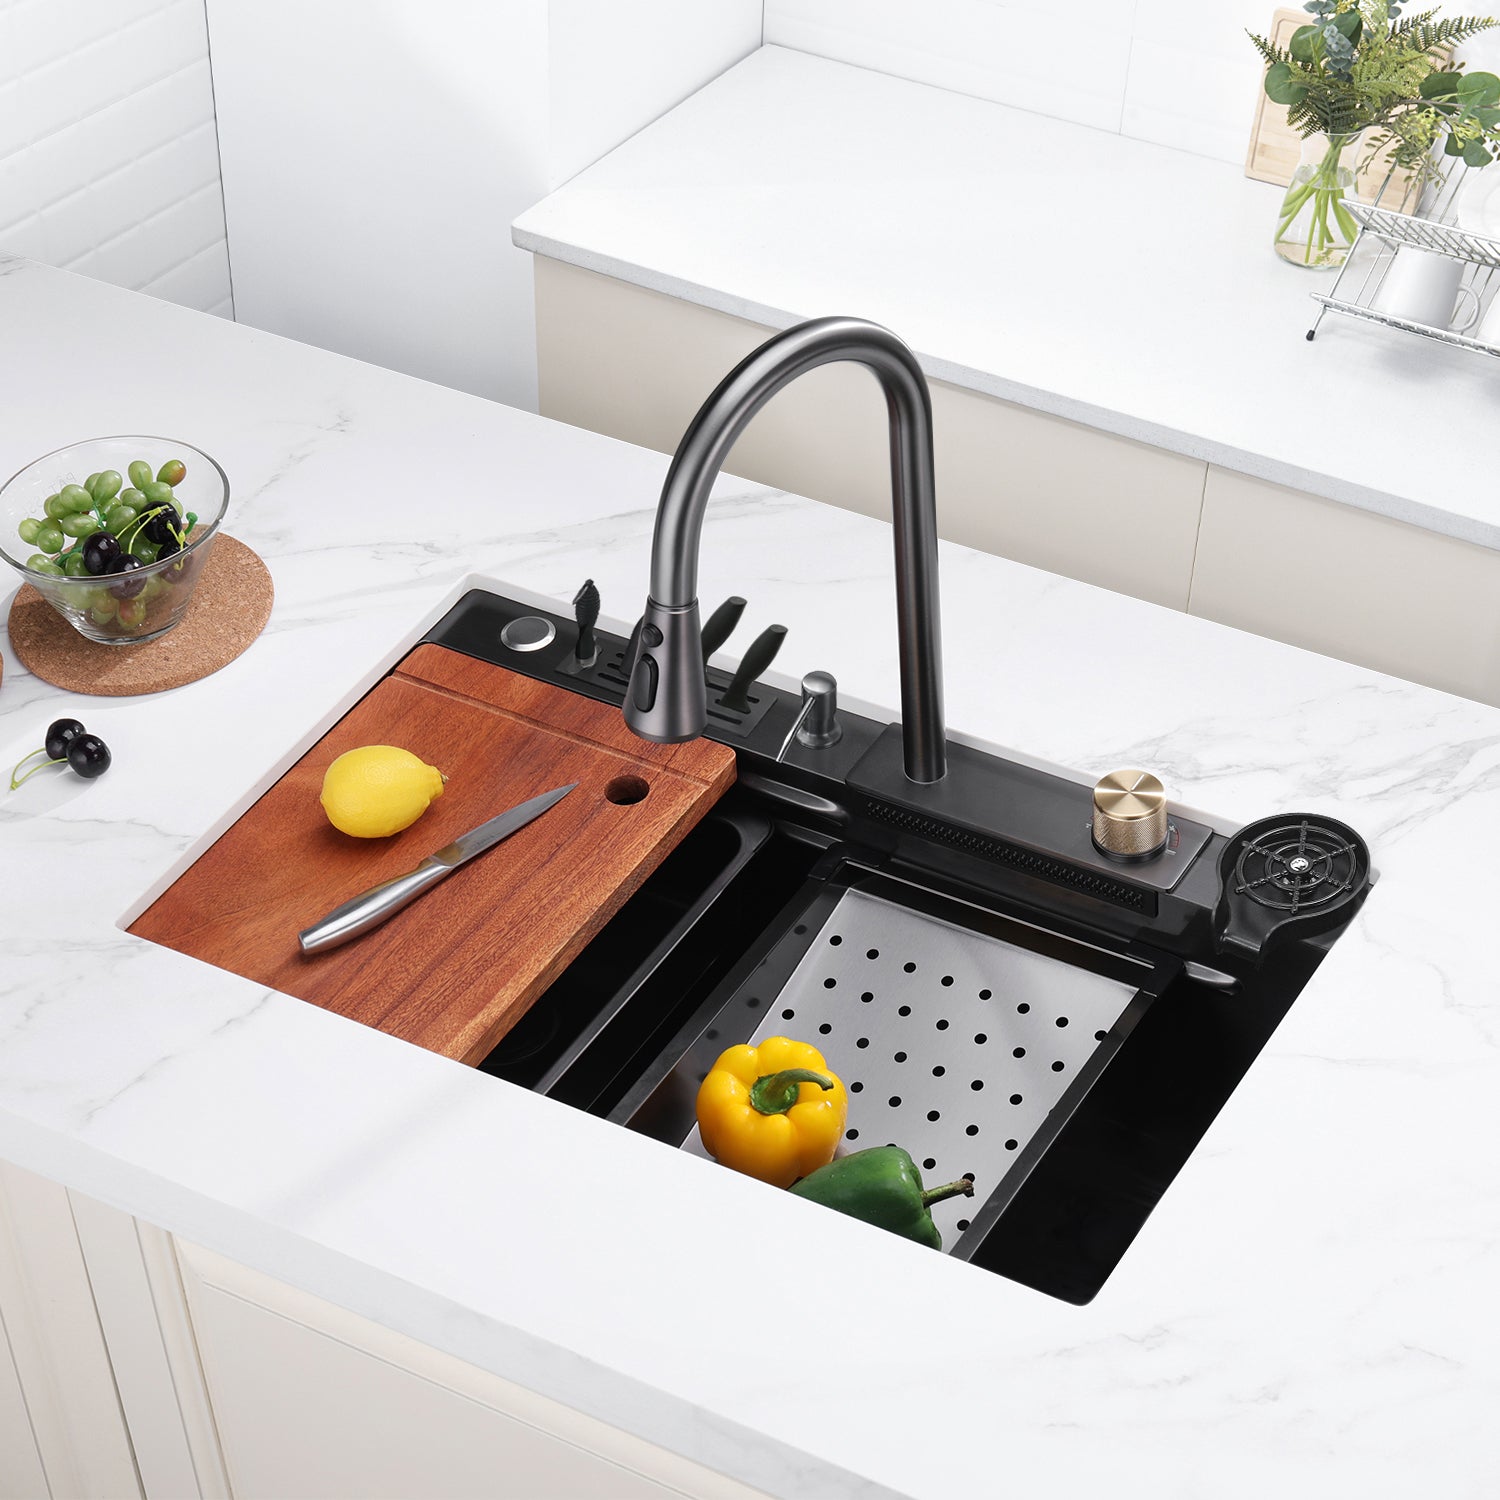 HUKA | Workstation Kitchen Sink Kit with Waterfall Faucet & Knife Holder - SKS2302